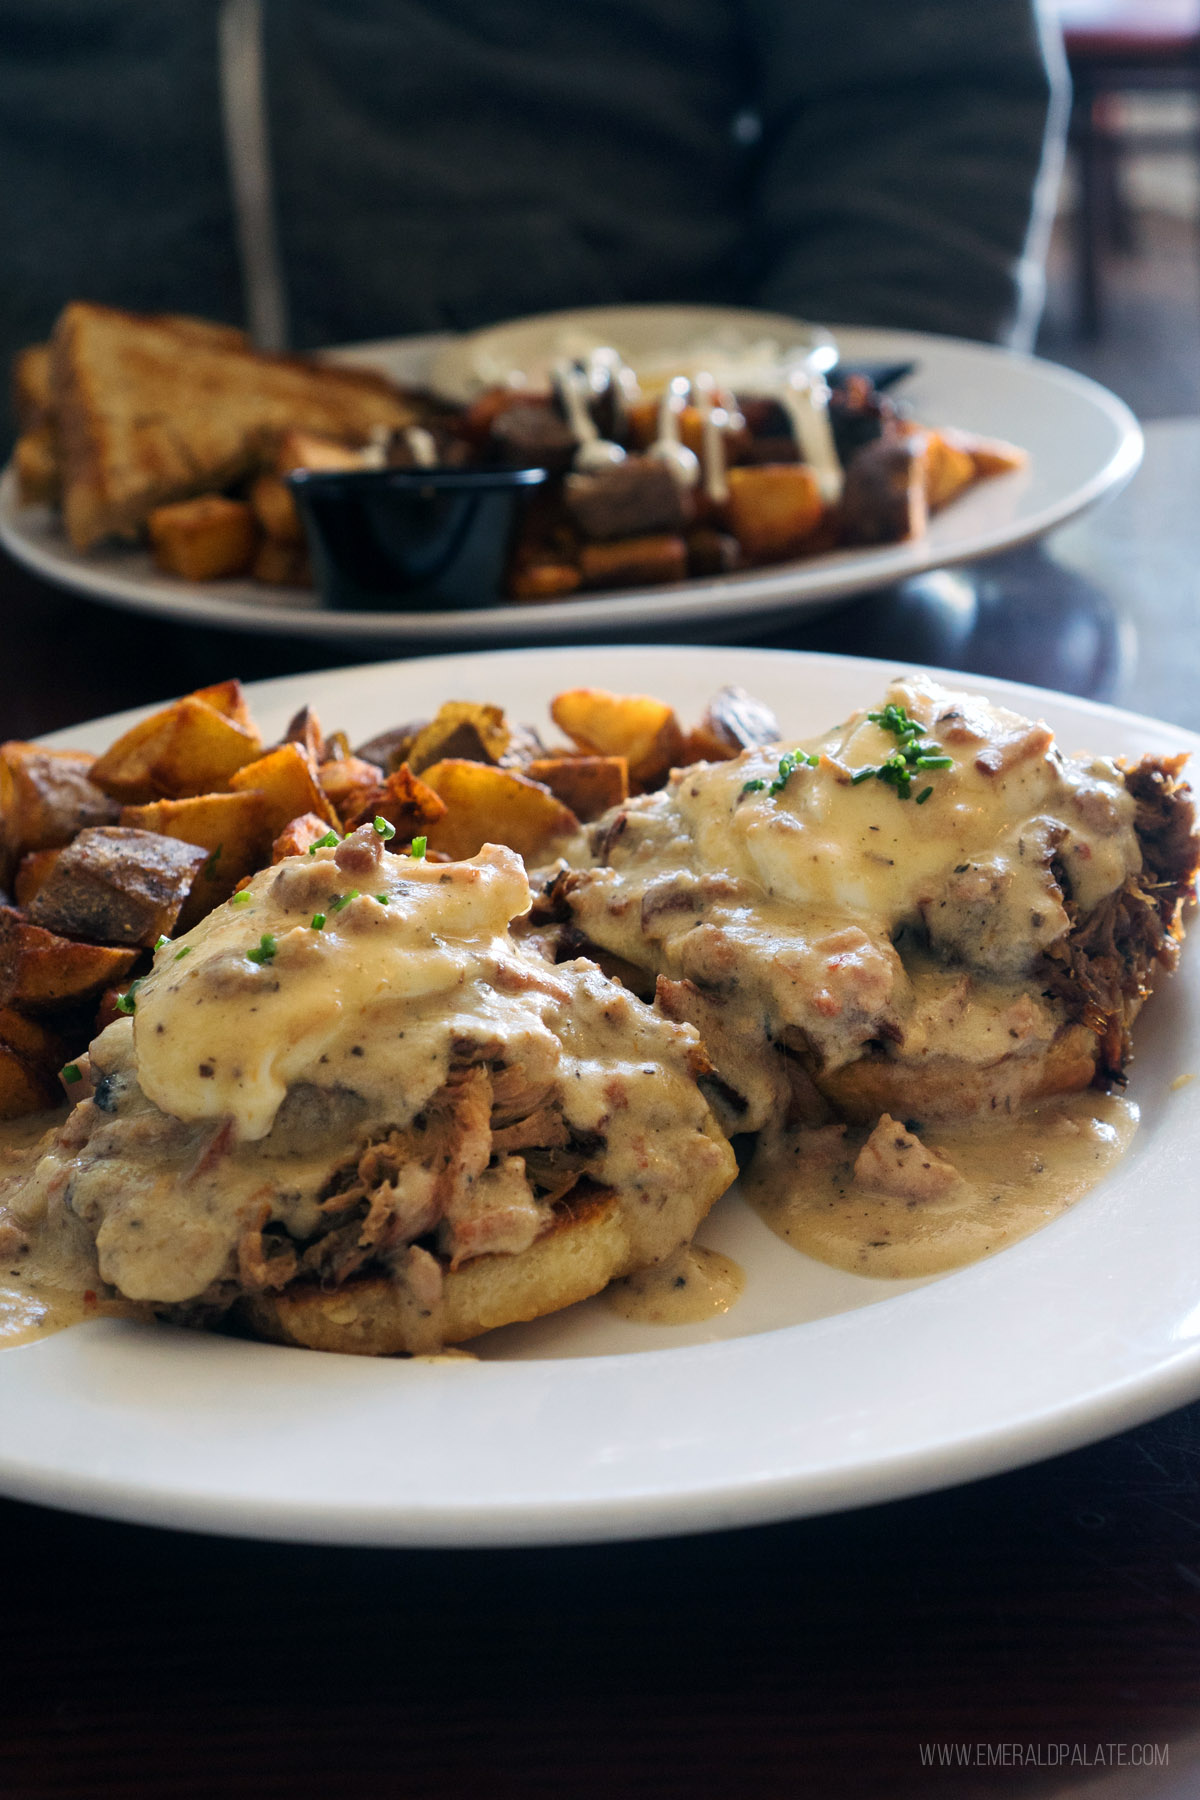 eggs Benedict smothered in gravy from an Anacortes restaurant